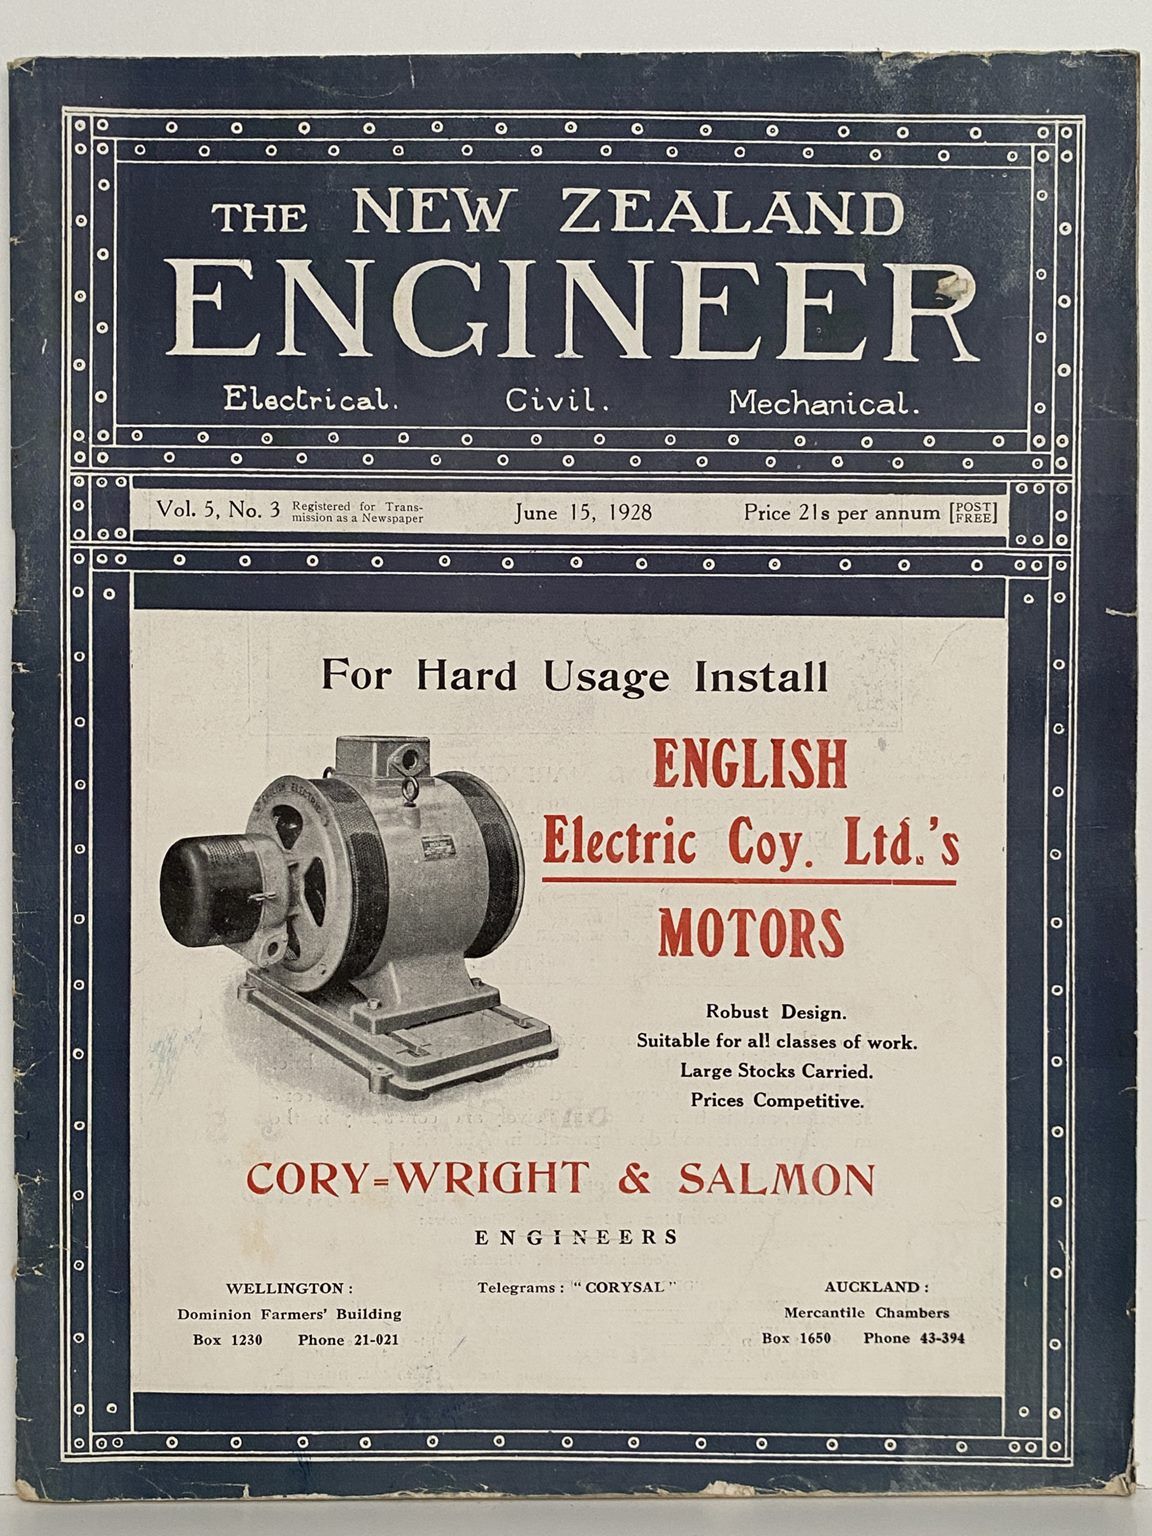 OLD MAGAZINE: The New Zealand Engineer Vol. 5, No. 3 - 15 June 1928